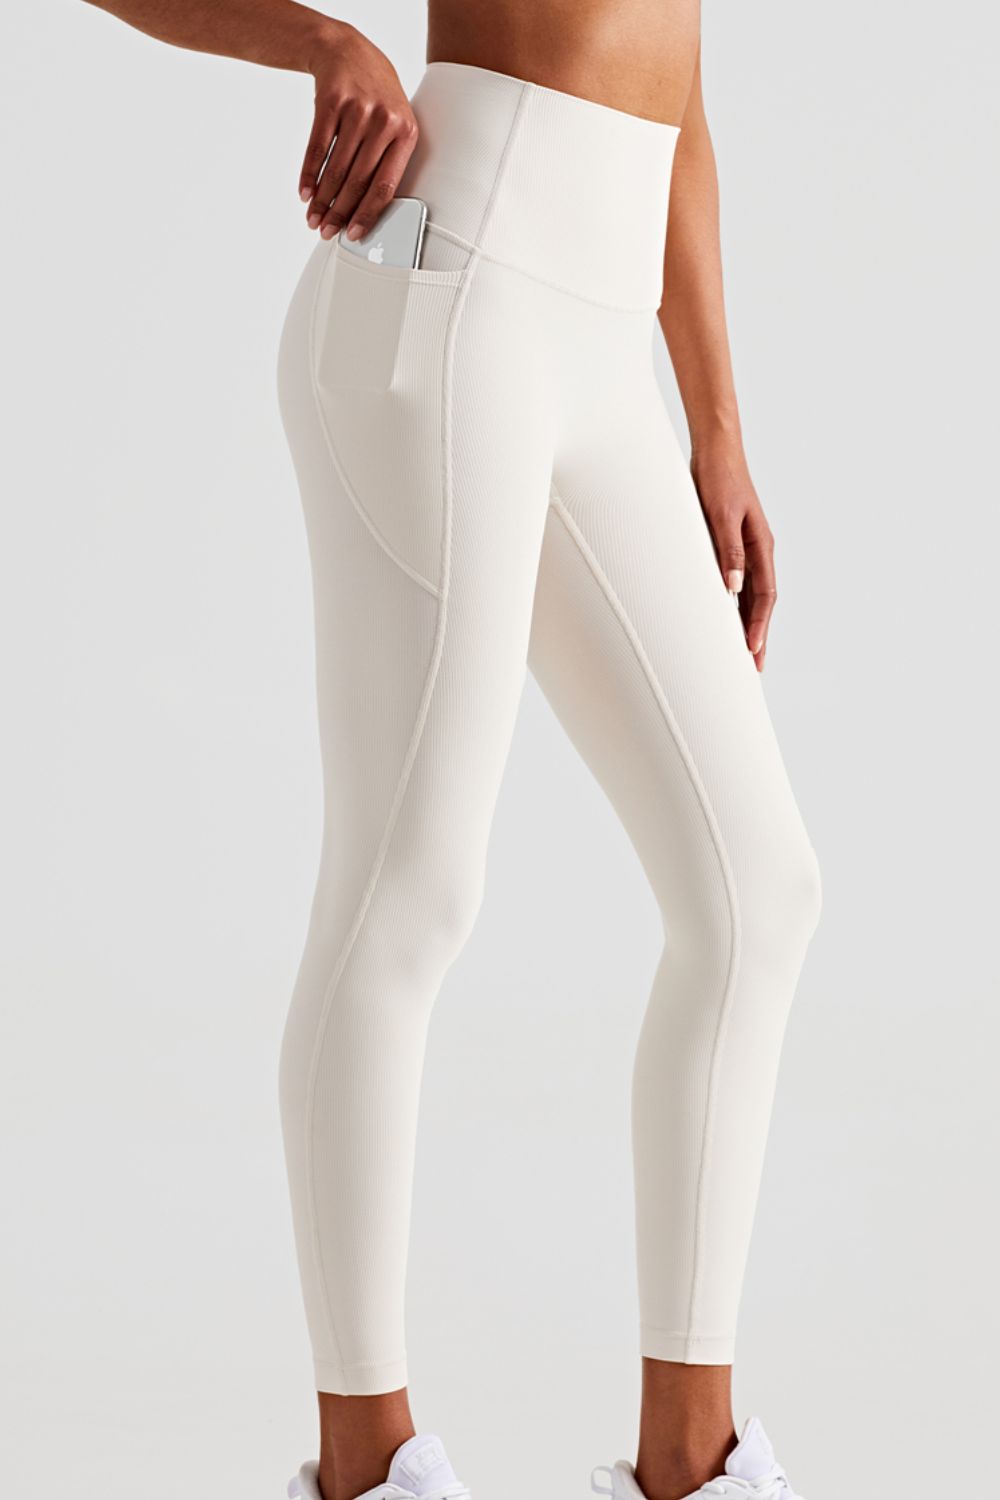 Women’s Soft and Breathable High-Waisted Yoga Leggings